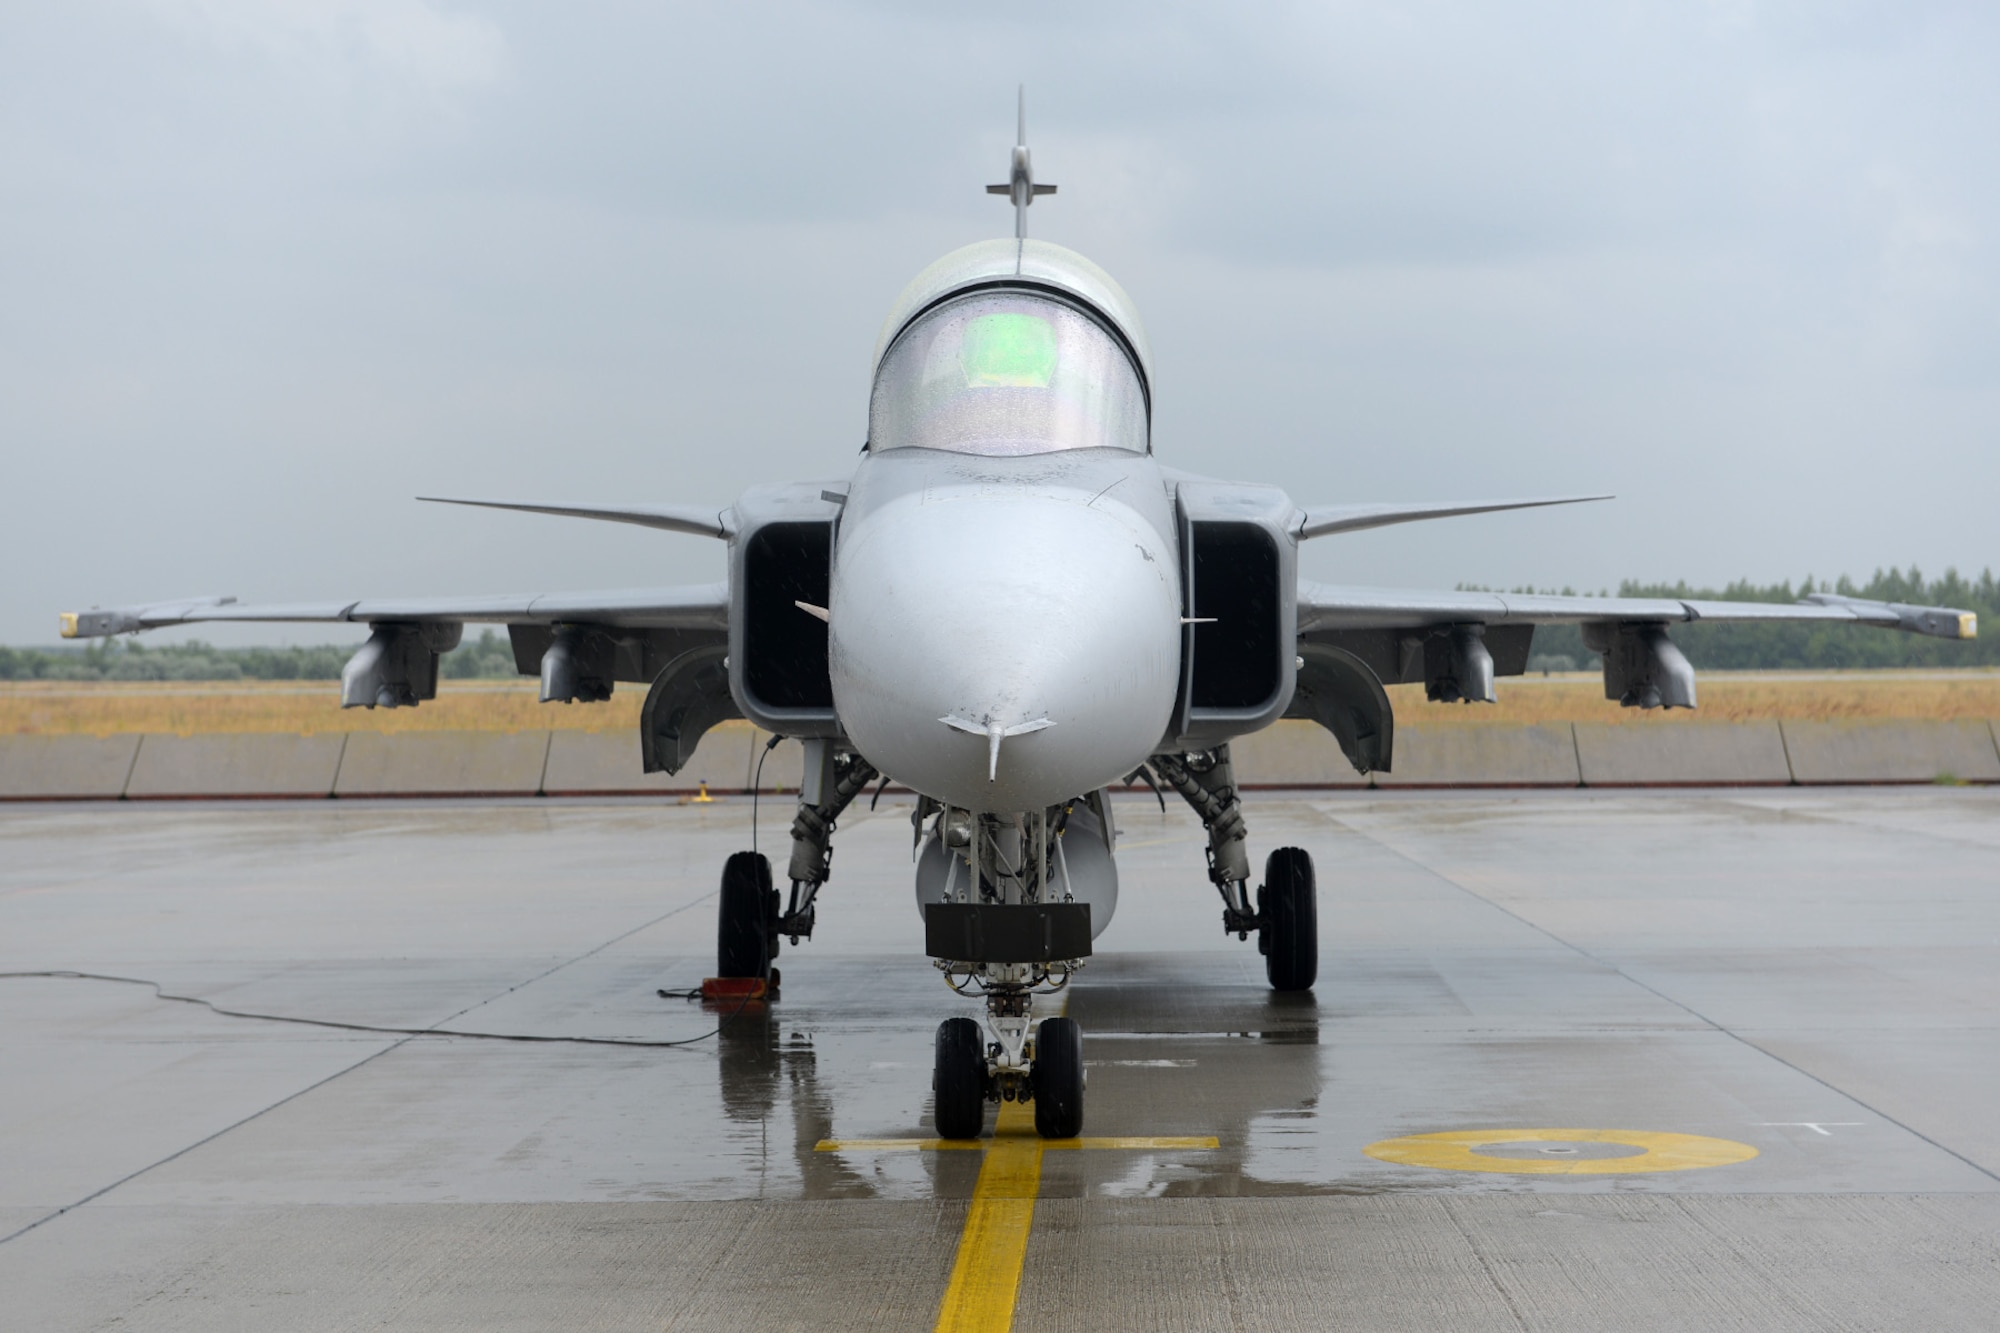 A Hungarian air force JAS-39 Gripen prepares to taxi June 24, 2015, during air refueling familiarization training on Kecskemét air base, Hungary. Hungarian, U.S. and Swedish air force personnel met for a two-week familiarization period enabling the Hungarian JAS-39 Gripen pilots to successfully perform air refueling for the first time. (U.S. Air Force photo by Senior Airman Kate Thornton/Released)